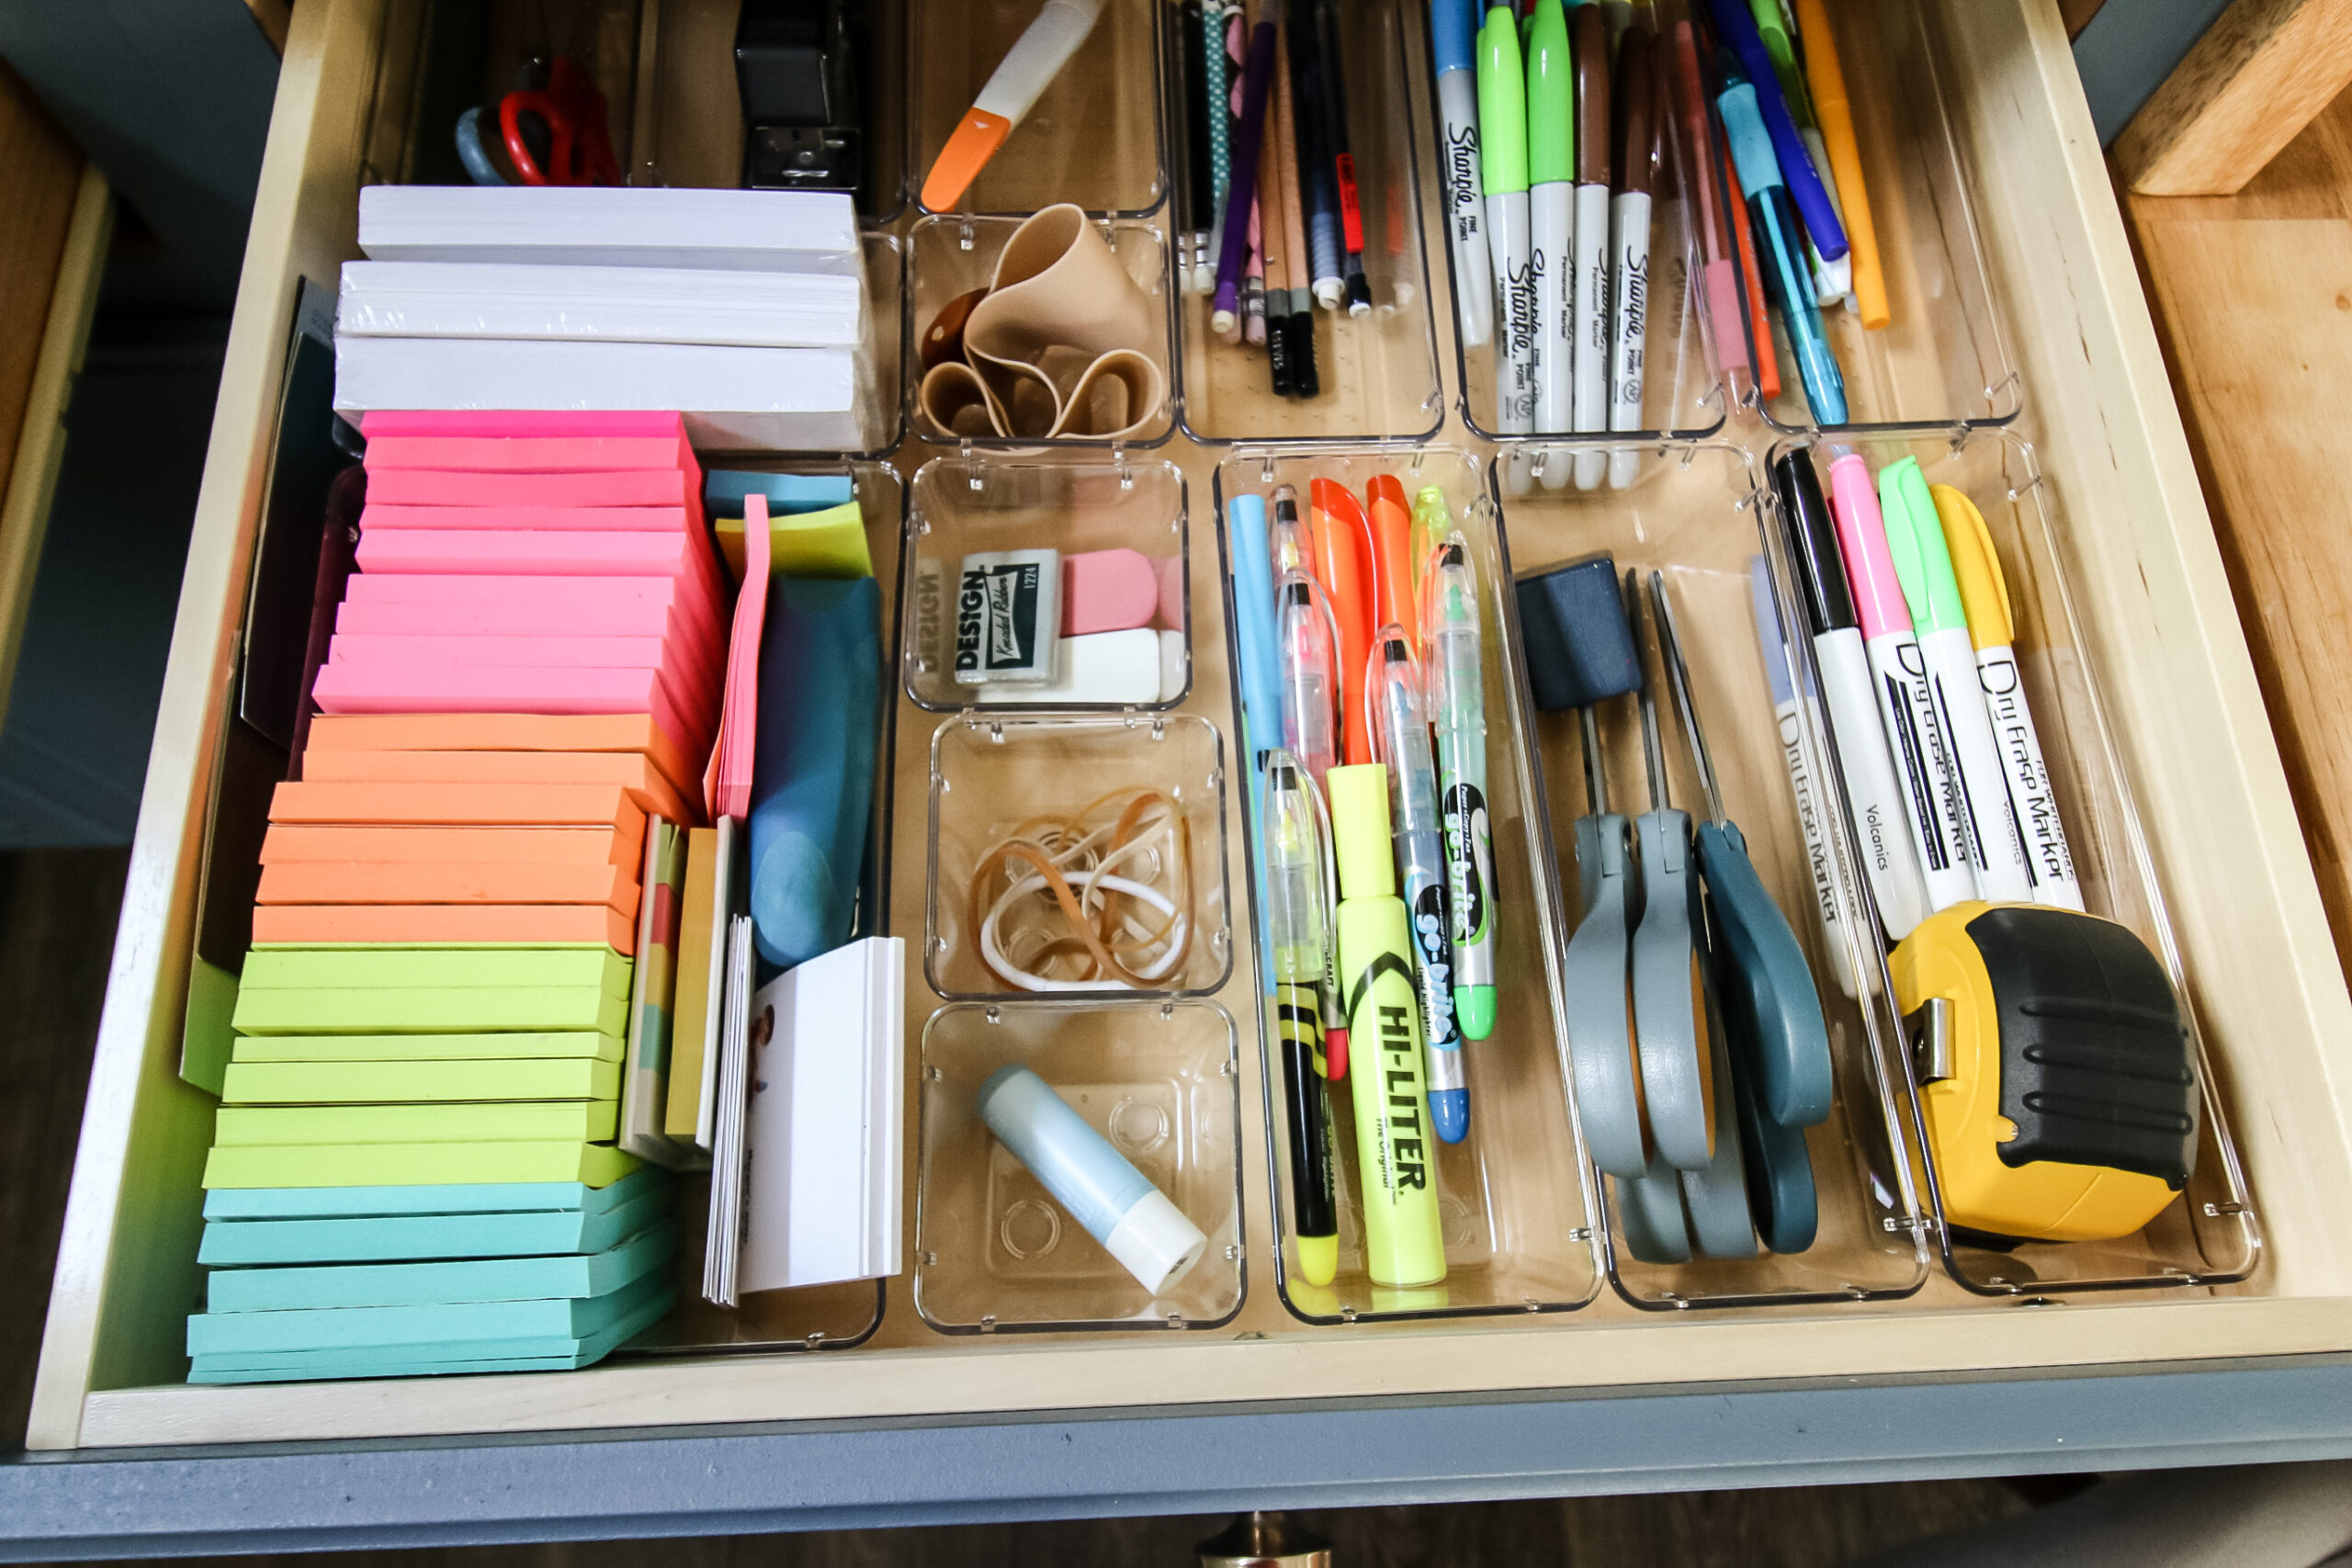 How to organize craft supplies in cabinets + drawers